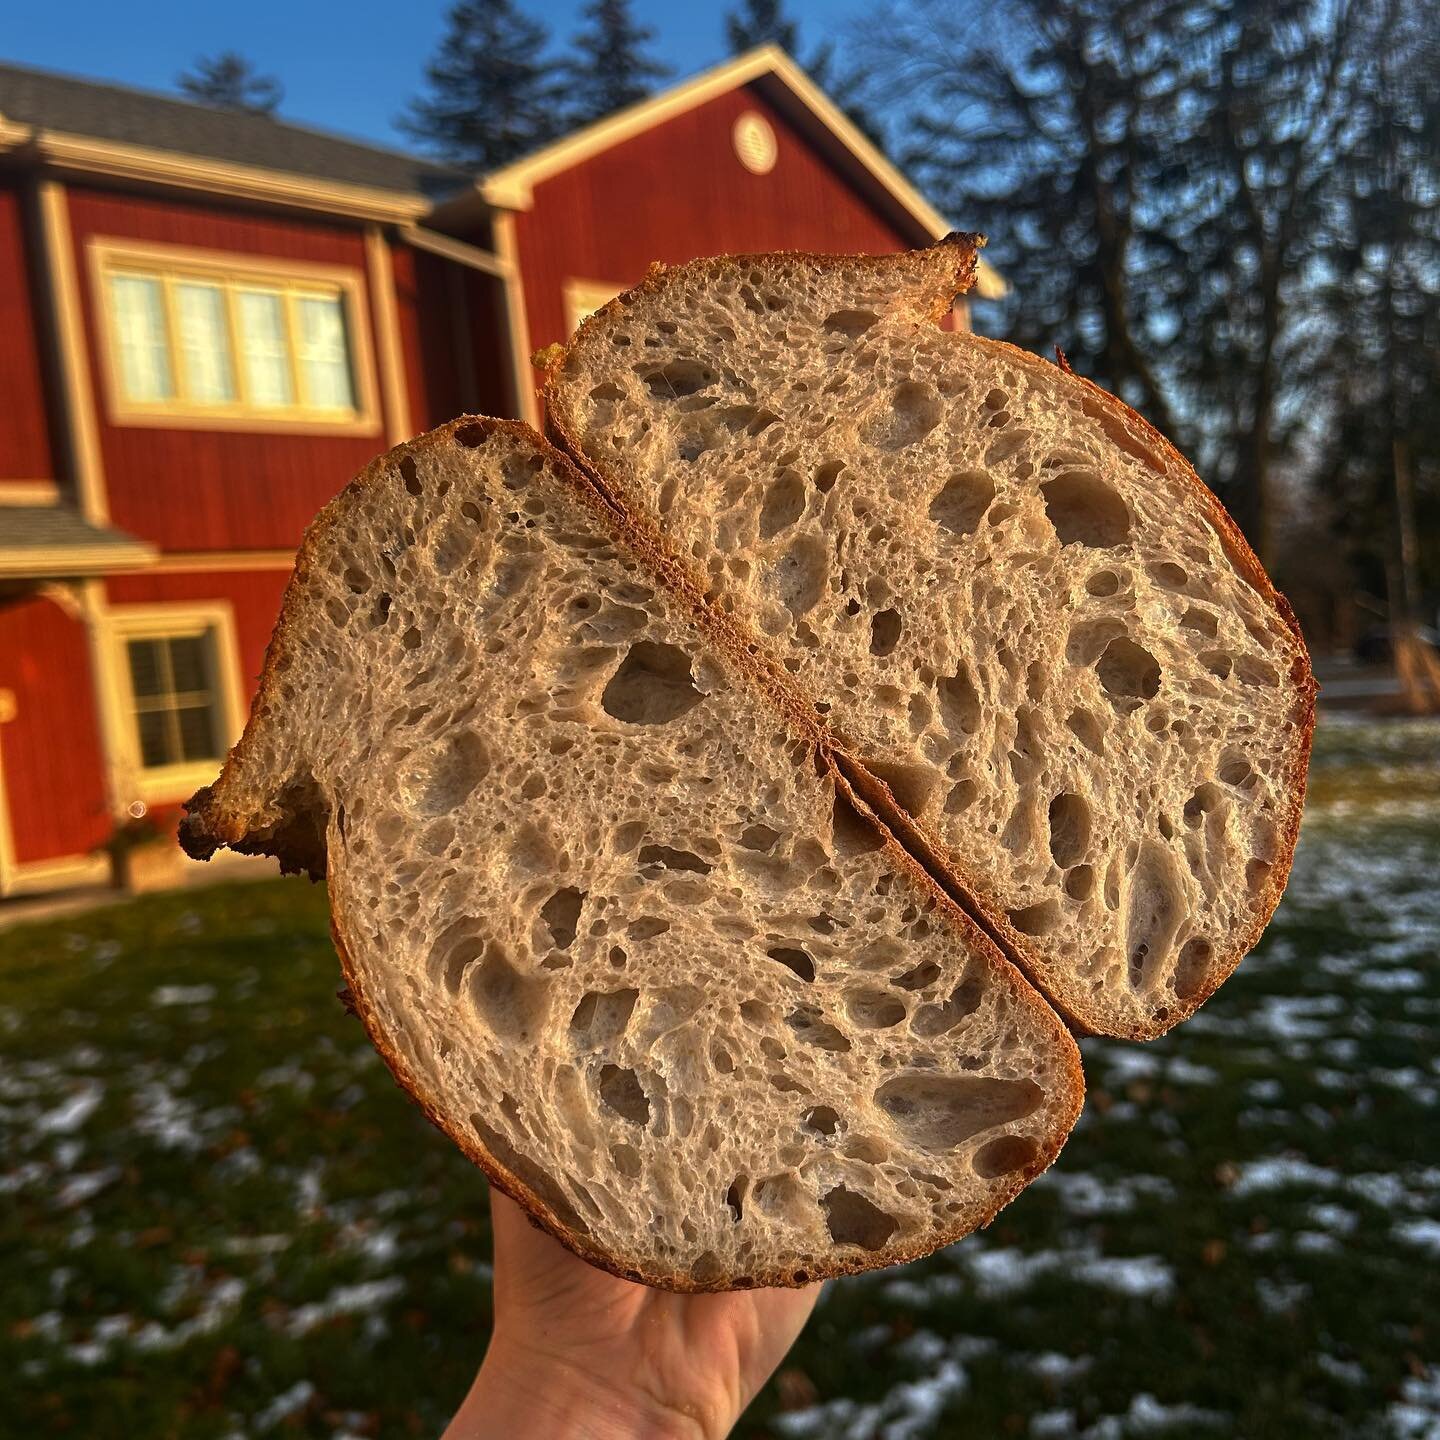 the almighty farmers sourdough 👑 looking pretty in this golden hour 

50% whole wheat 
5% rye 
45% sifted wheat 

slice it up, toast it, make a sandwich, eat it with some soup, rip a loaf in half it&rsquo;s up to you! perfect for literally anything 